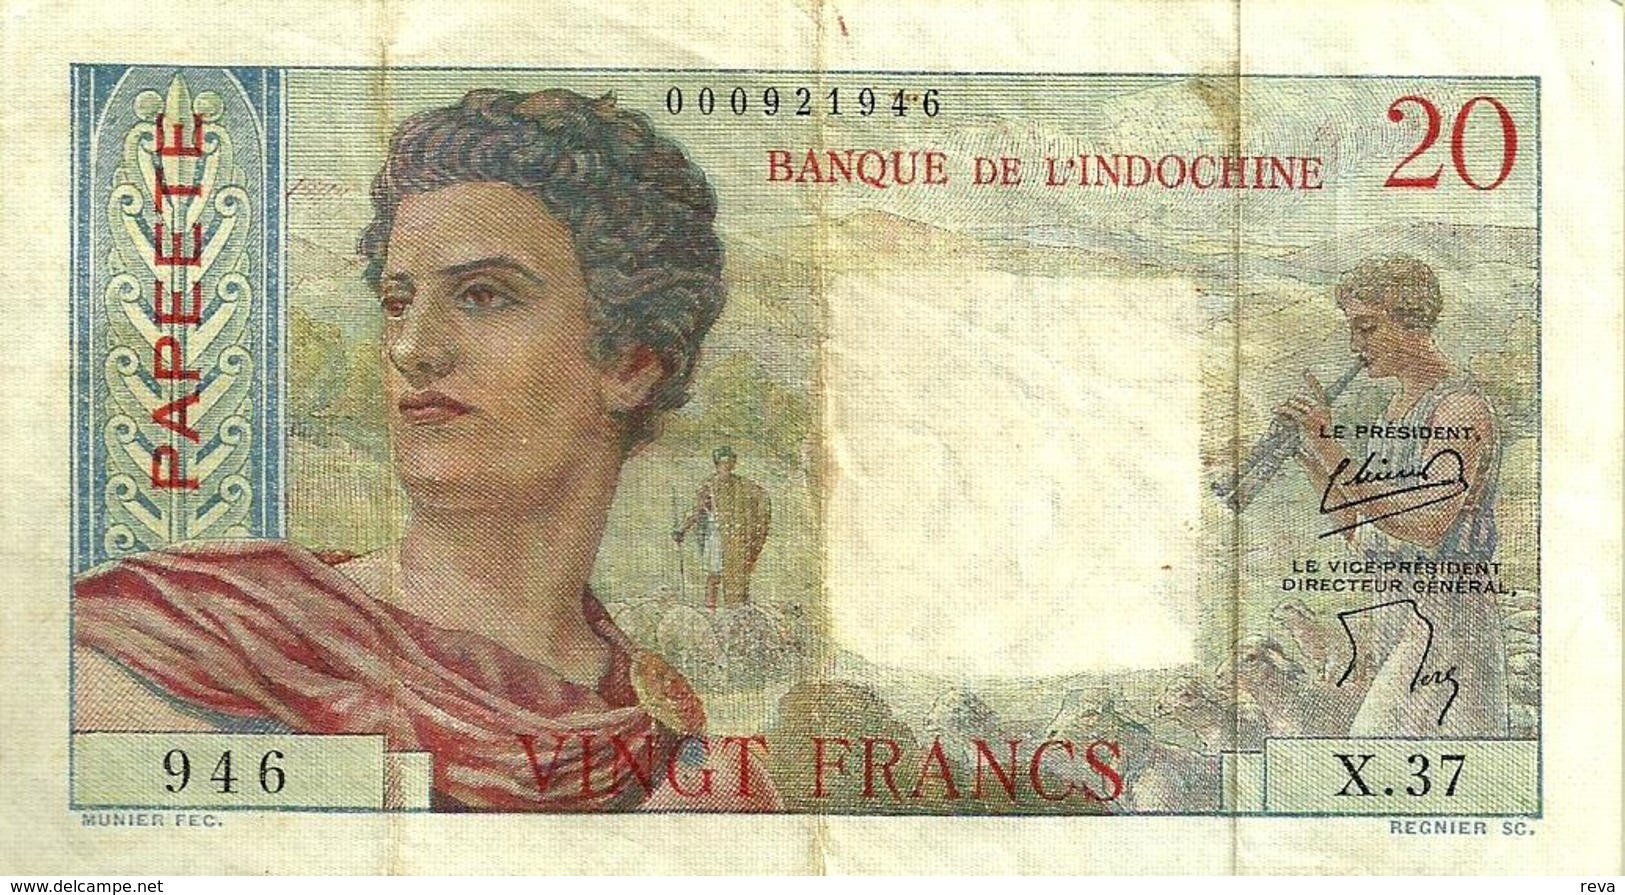 FRENCH POLYNESIA 20 FRANCS GREY MAN HEAD FRONT WOMAN BACK NOT DATED(1953) P21c 3RD SIG VARIETY AVF READ DESCRIPTION!! - Papeete (Polynésie Française 1914-1985)